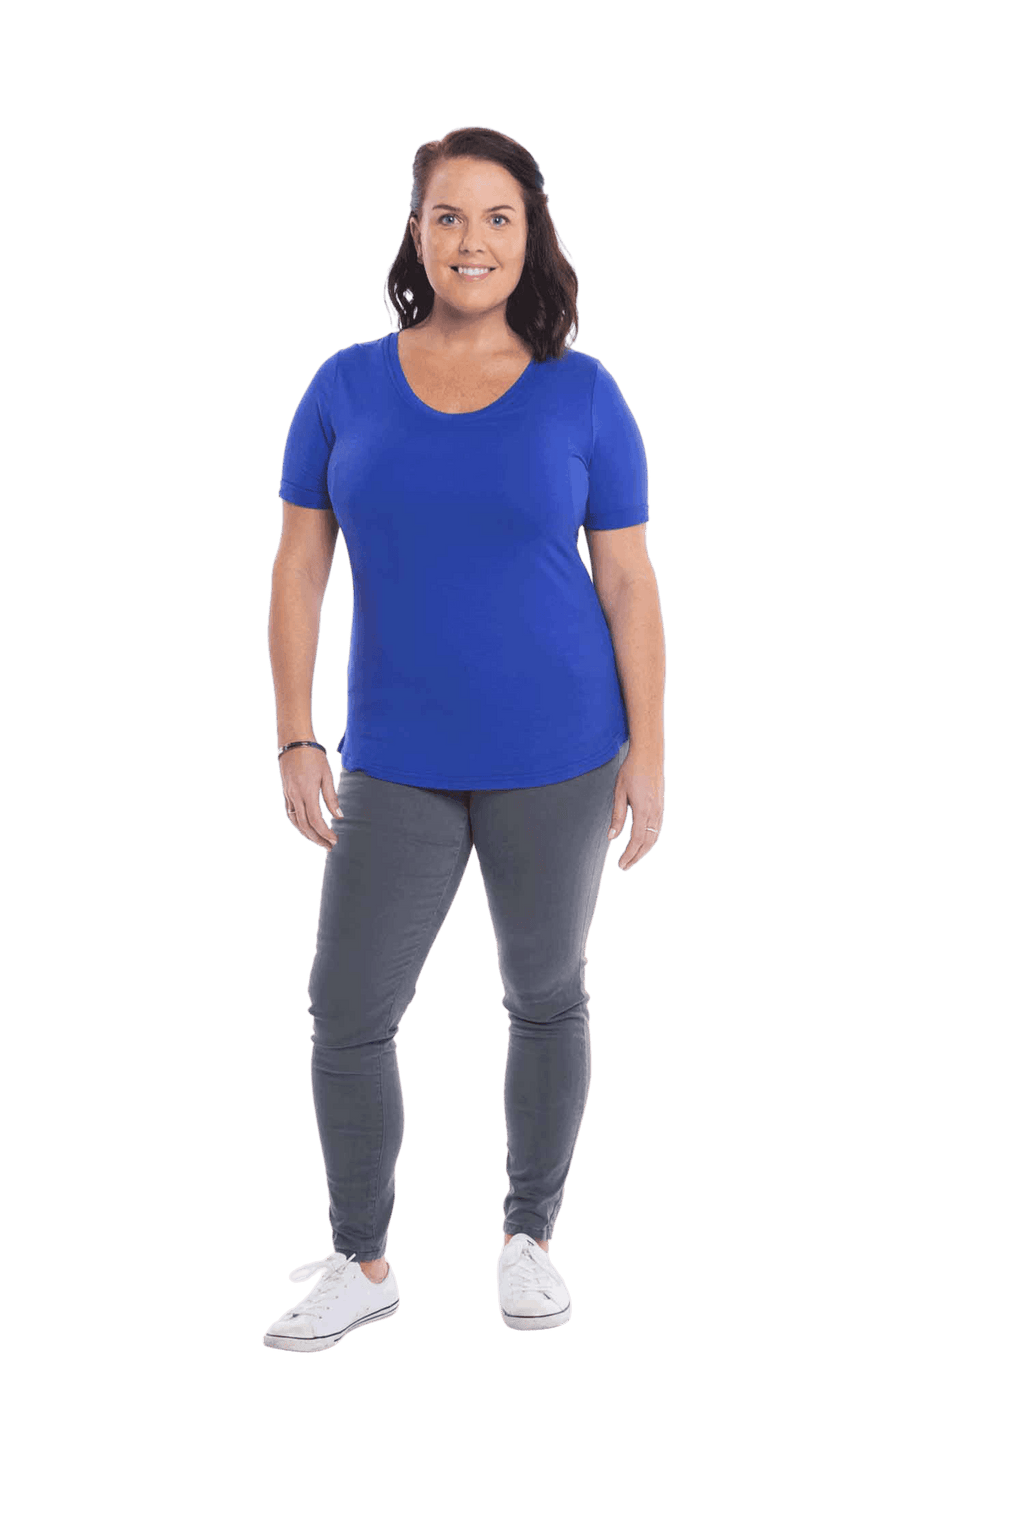 Petite model facing the camera wearing cobalt blue short sleeved tee, featuring rounded neckline, and scooped hem. Stevie available in sizes 6-18